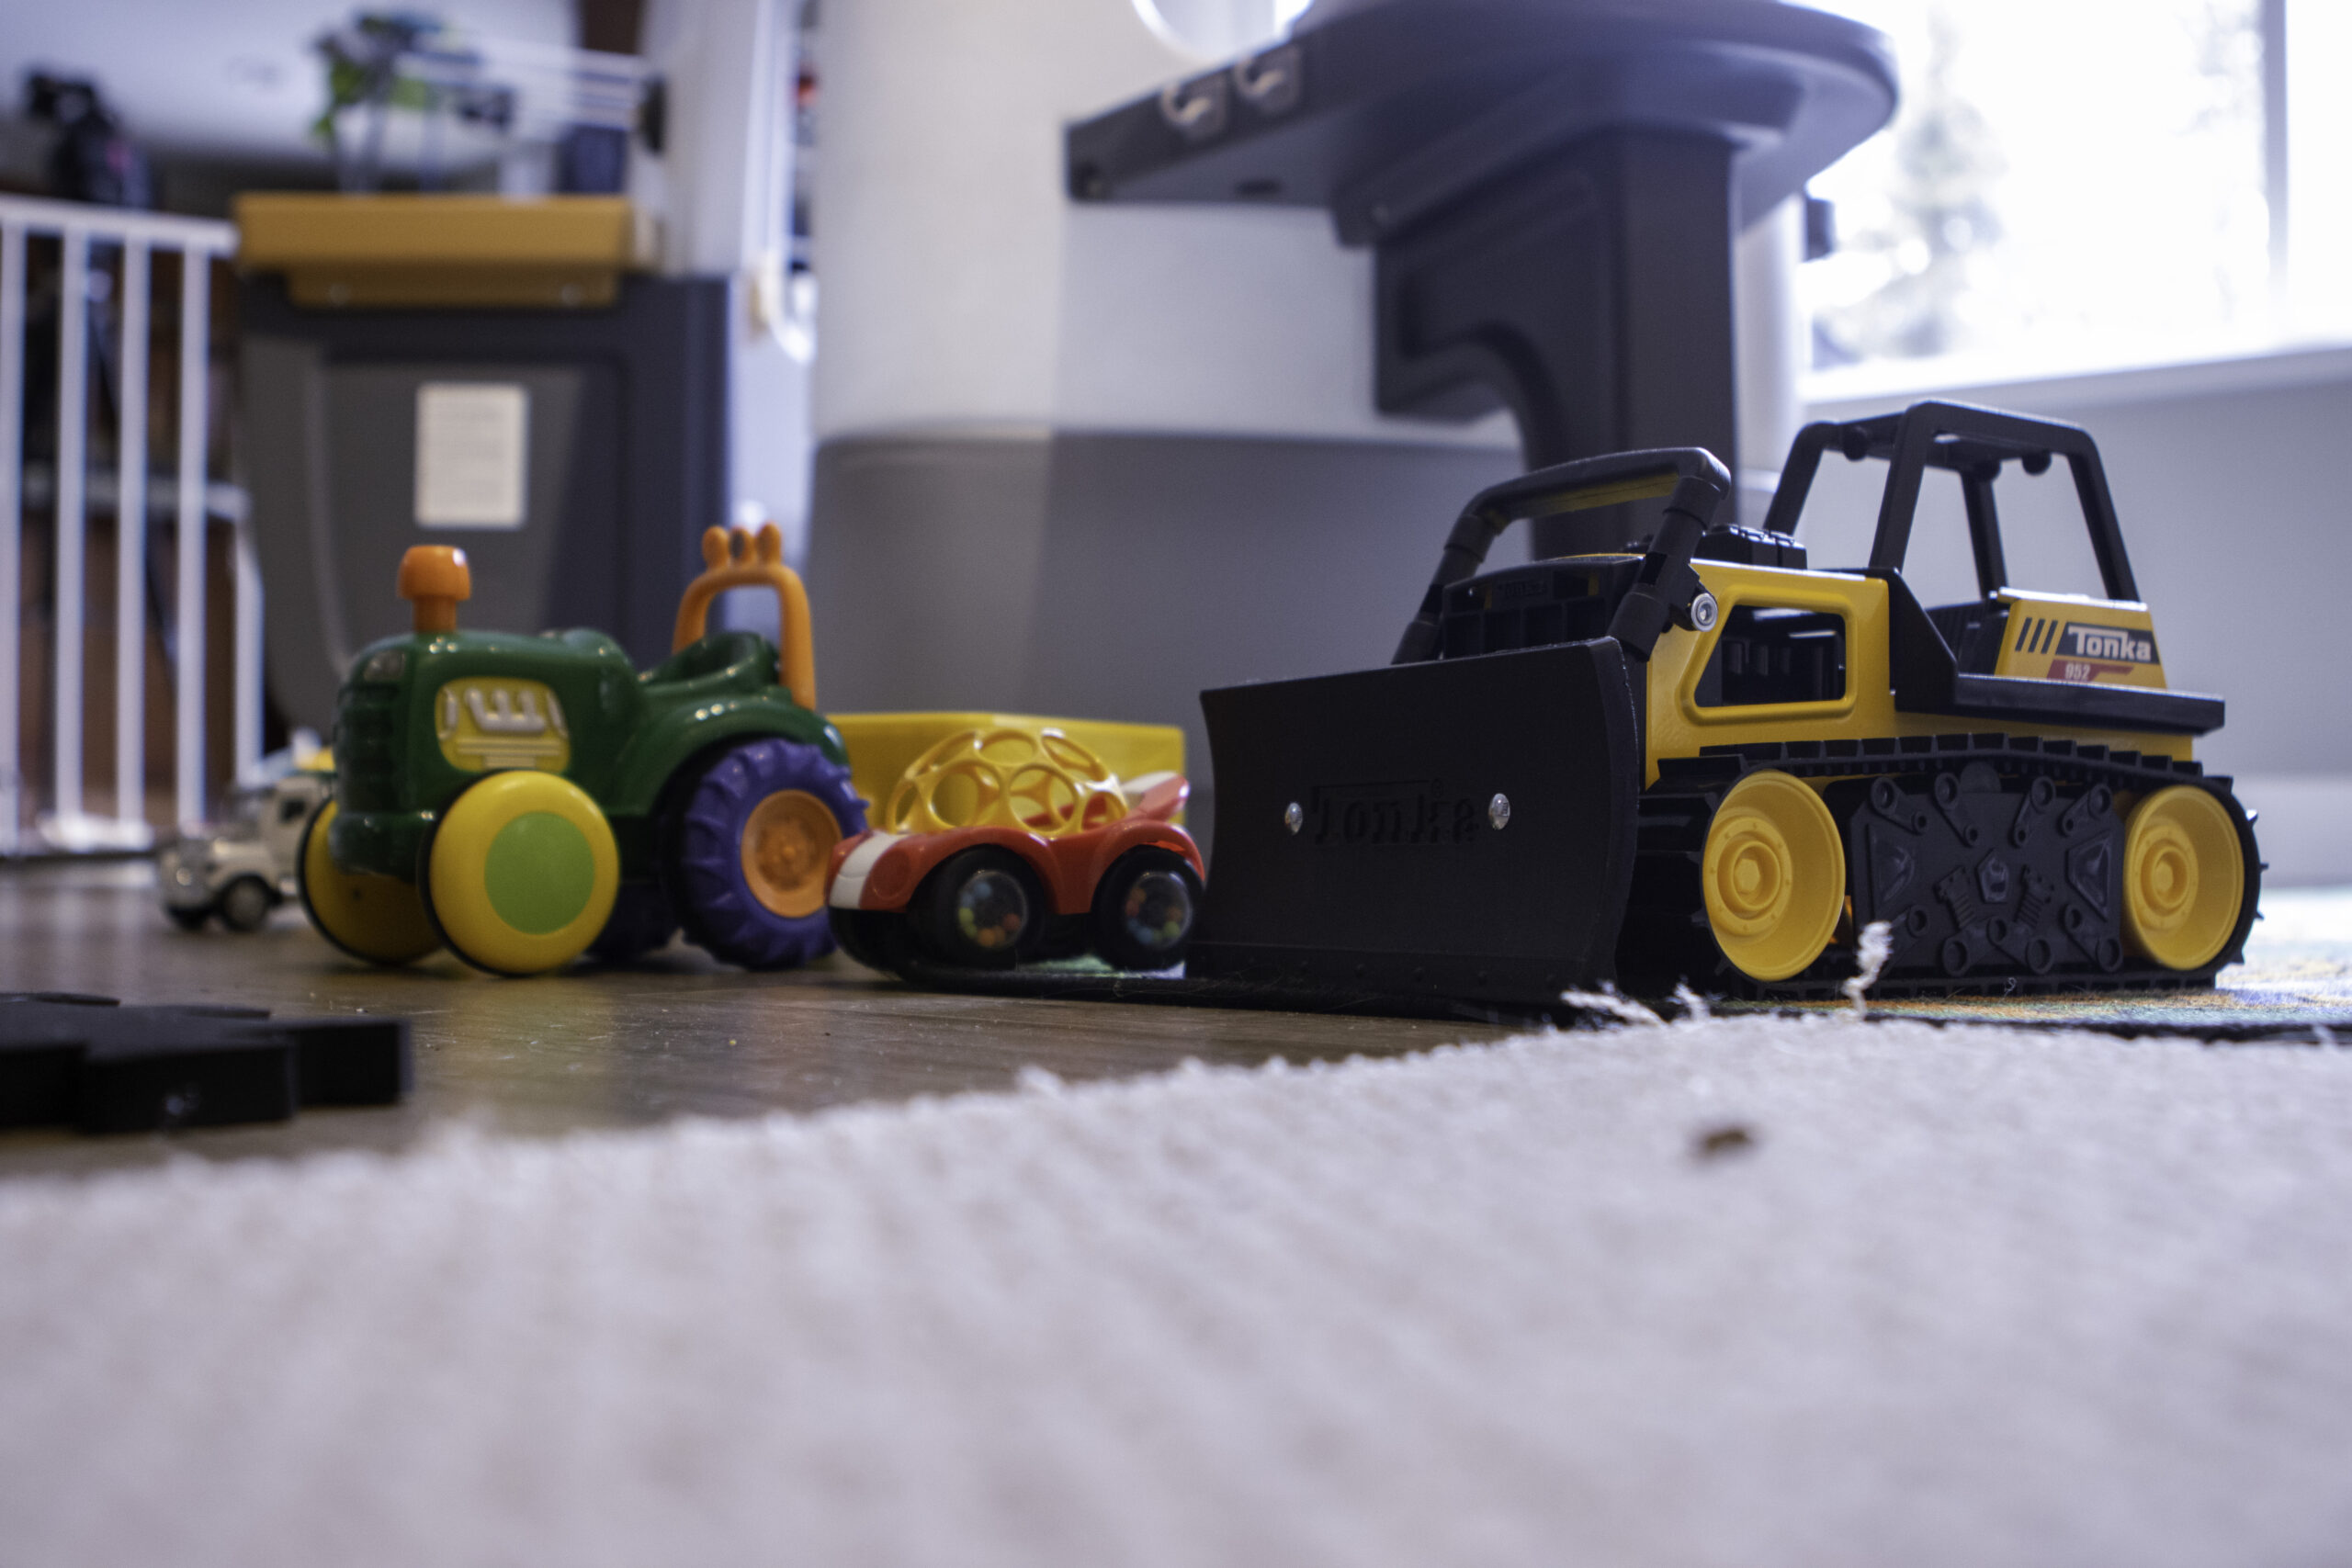 a line of toy cars and trucks on the ground